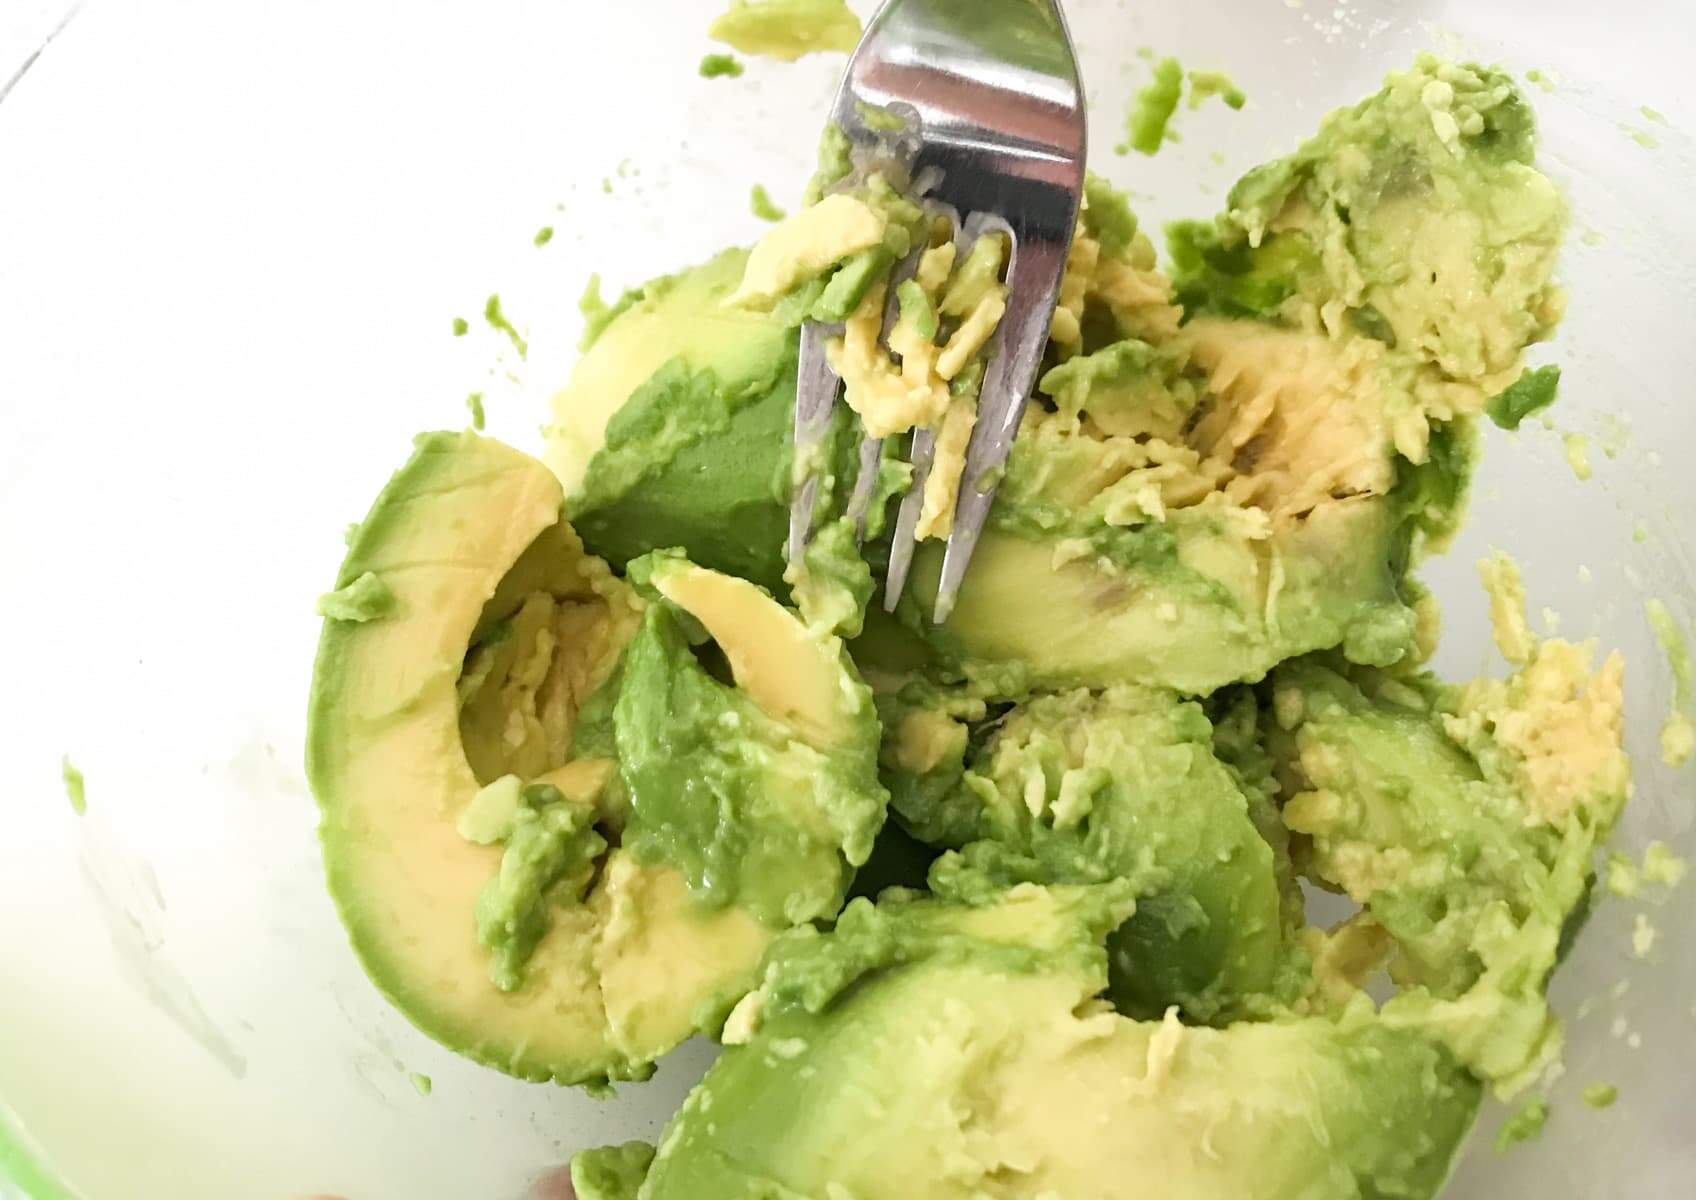 Smashing up avocado to be used in guacamole.